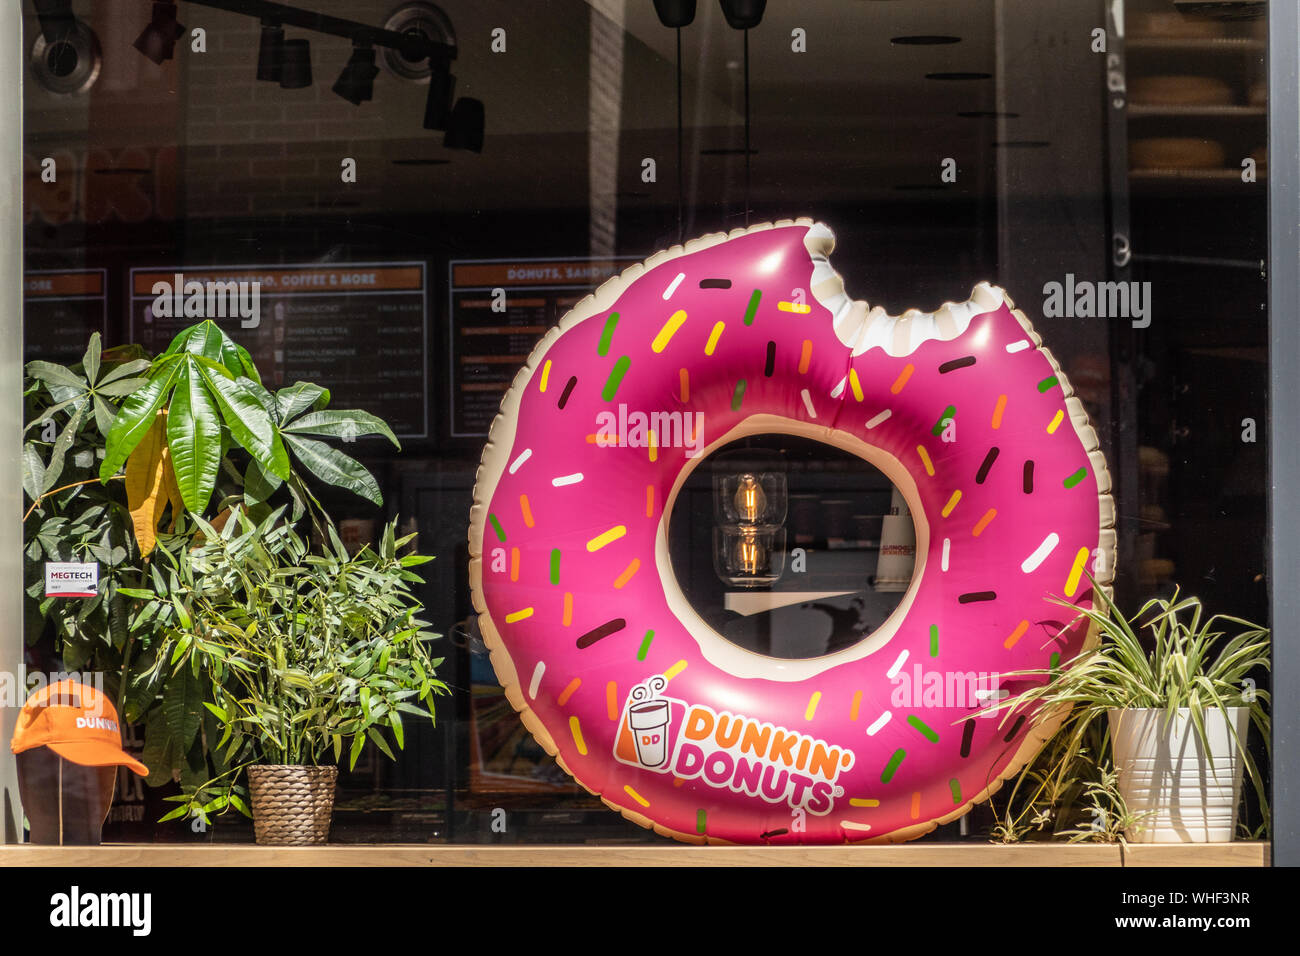 Amsterdam, the Netherlands - July 1, 2019: Giant blown-up image of pink Dunkin’Donuts image in window of shop with same name. Stock Photo